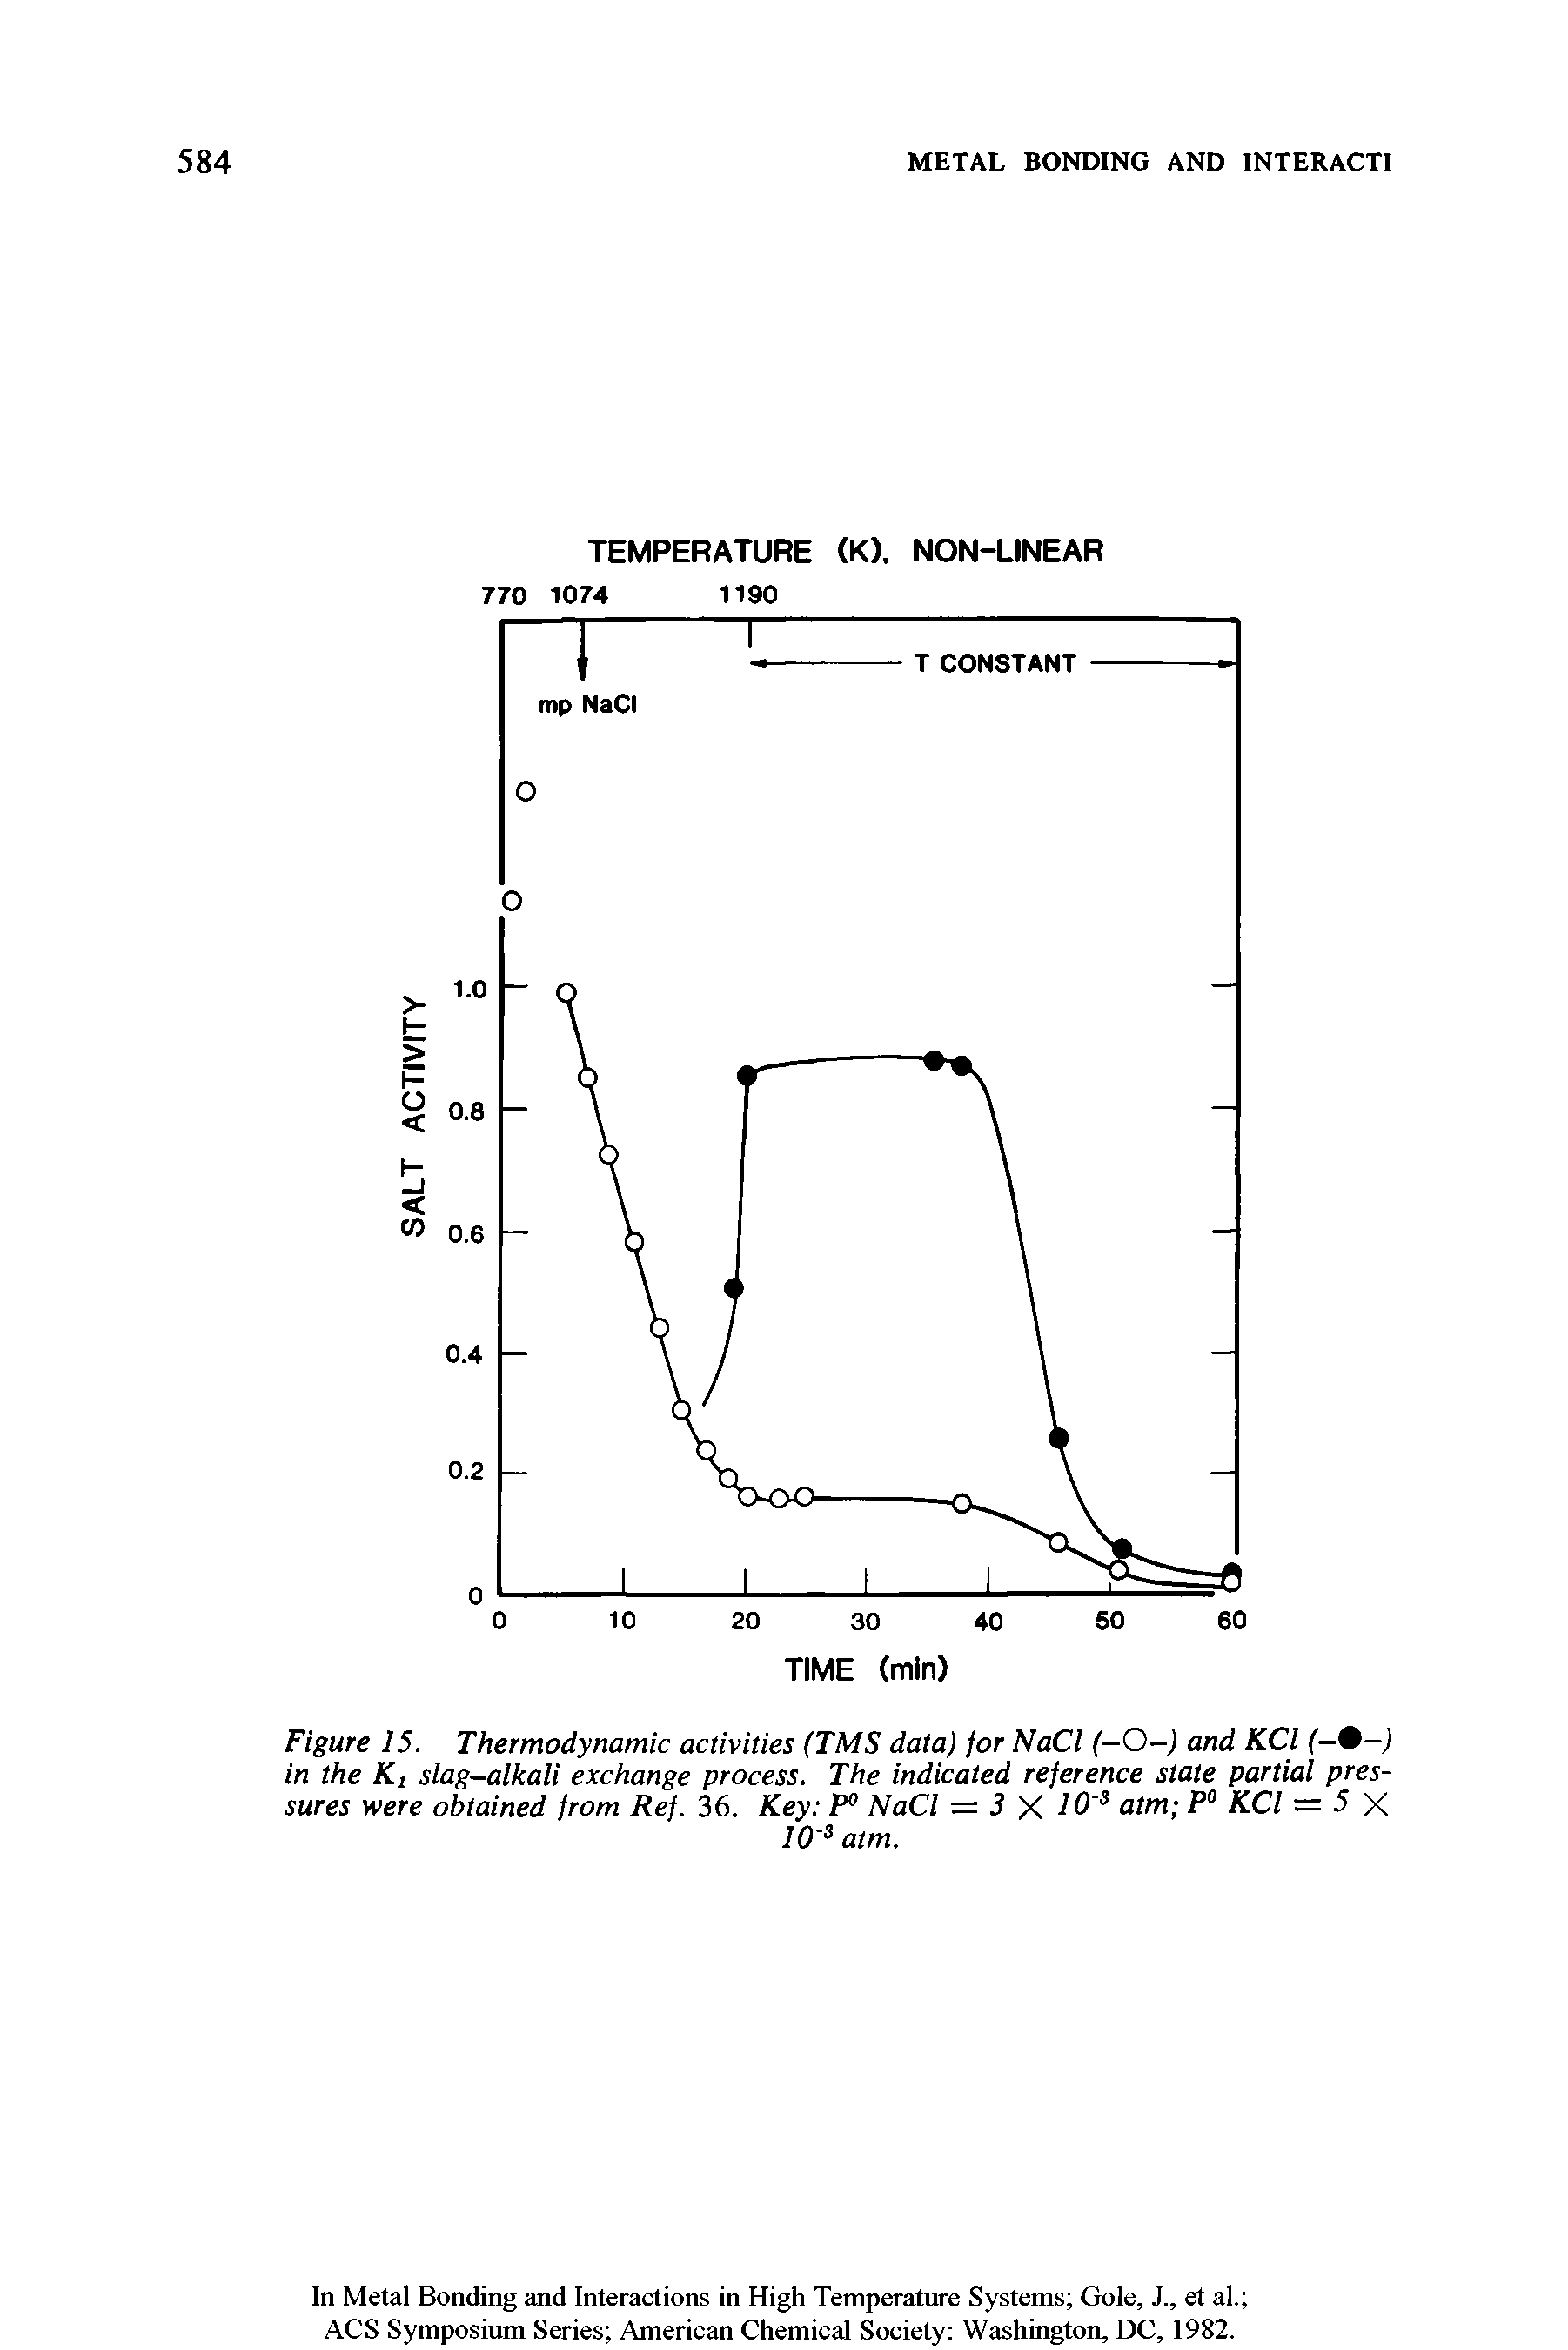 Figure 15. Thermodynamic activities (TMS data) for NaCl (-0-) and KCl in the Ki slag-alkali exchange process. The indicated reference state partial pressures were obtained from Ref. 36. Key P NaCl = 5 X atm P° KCl = 5 X...